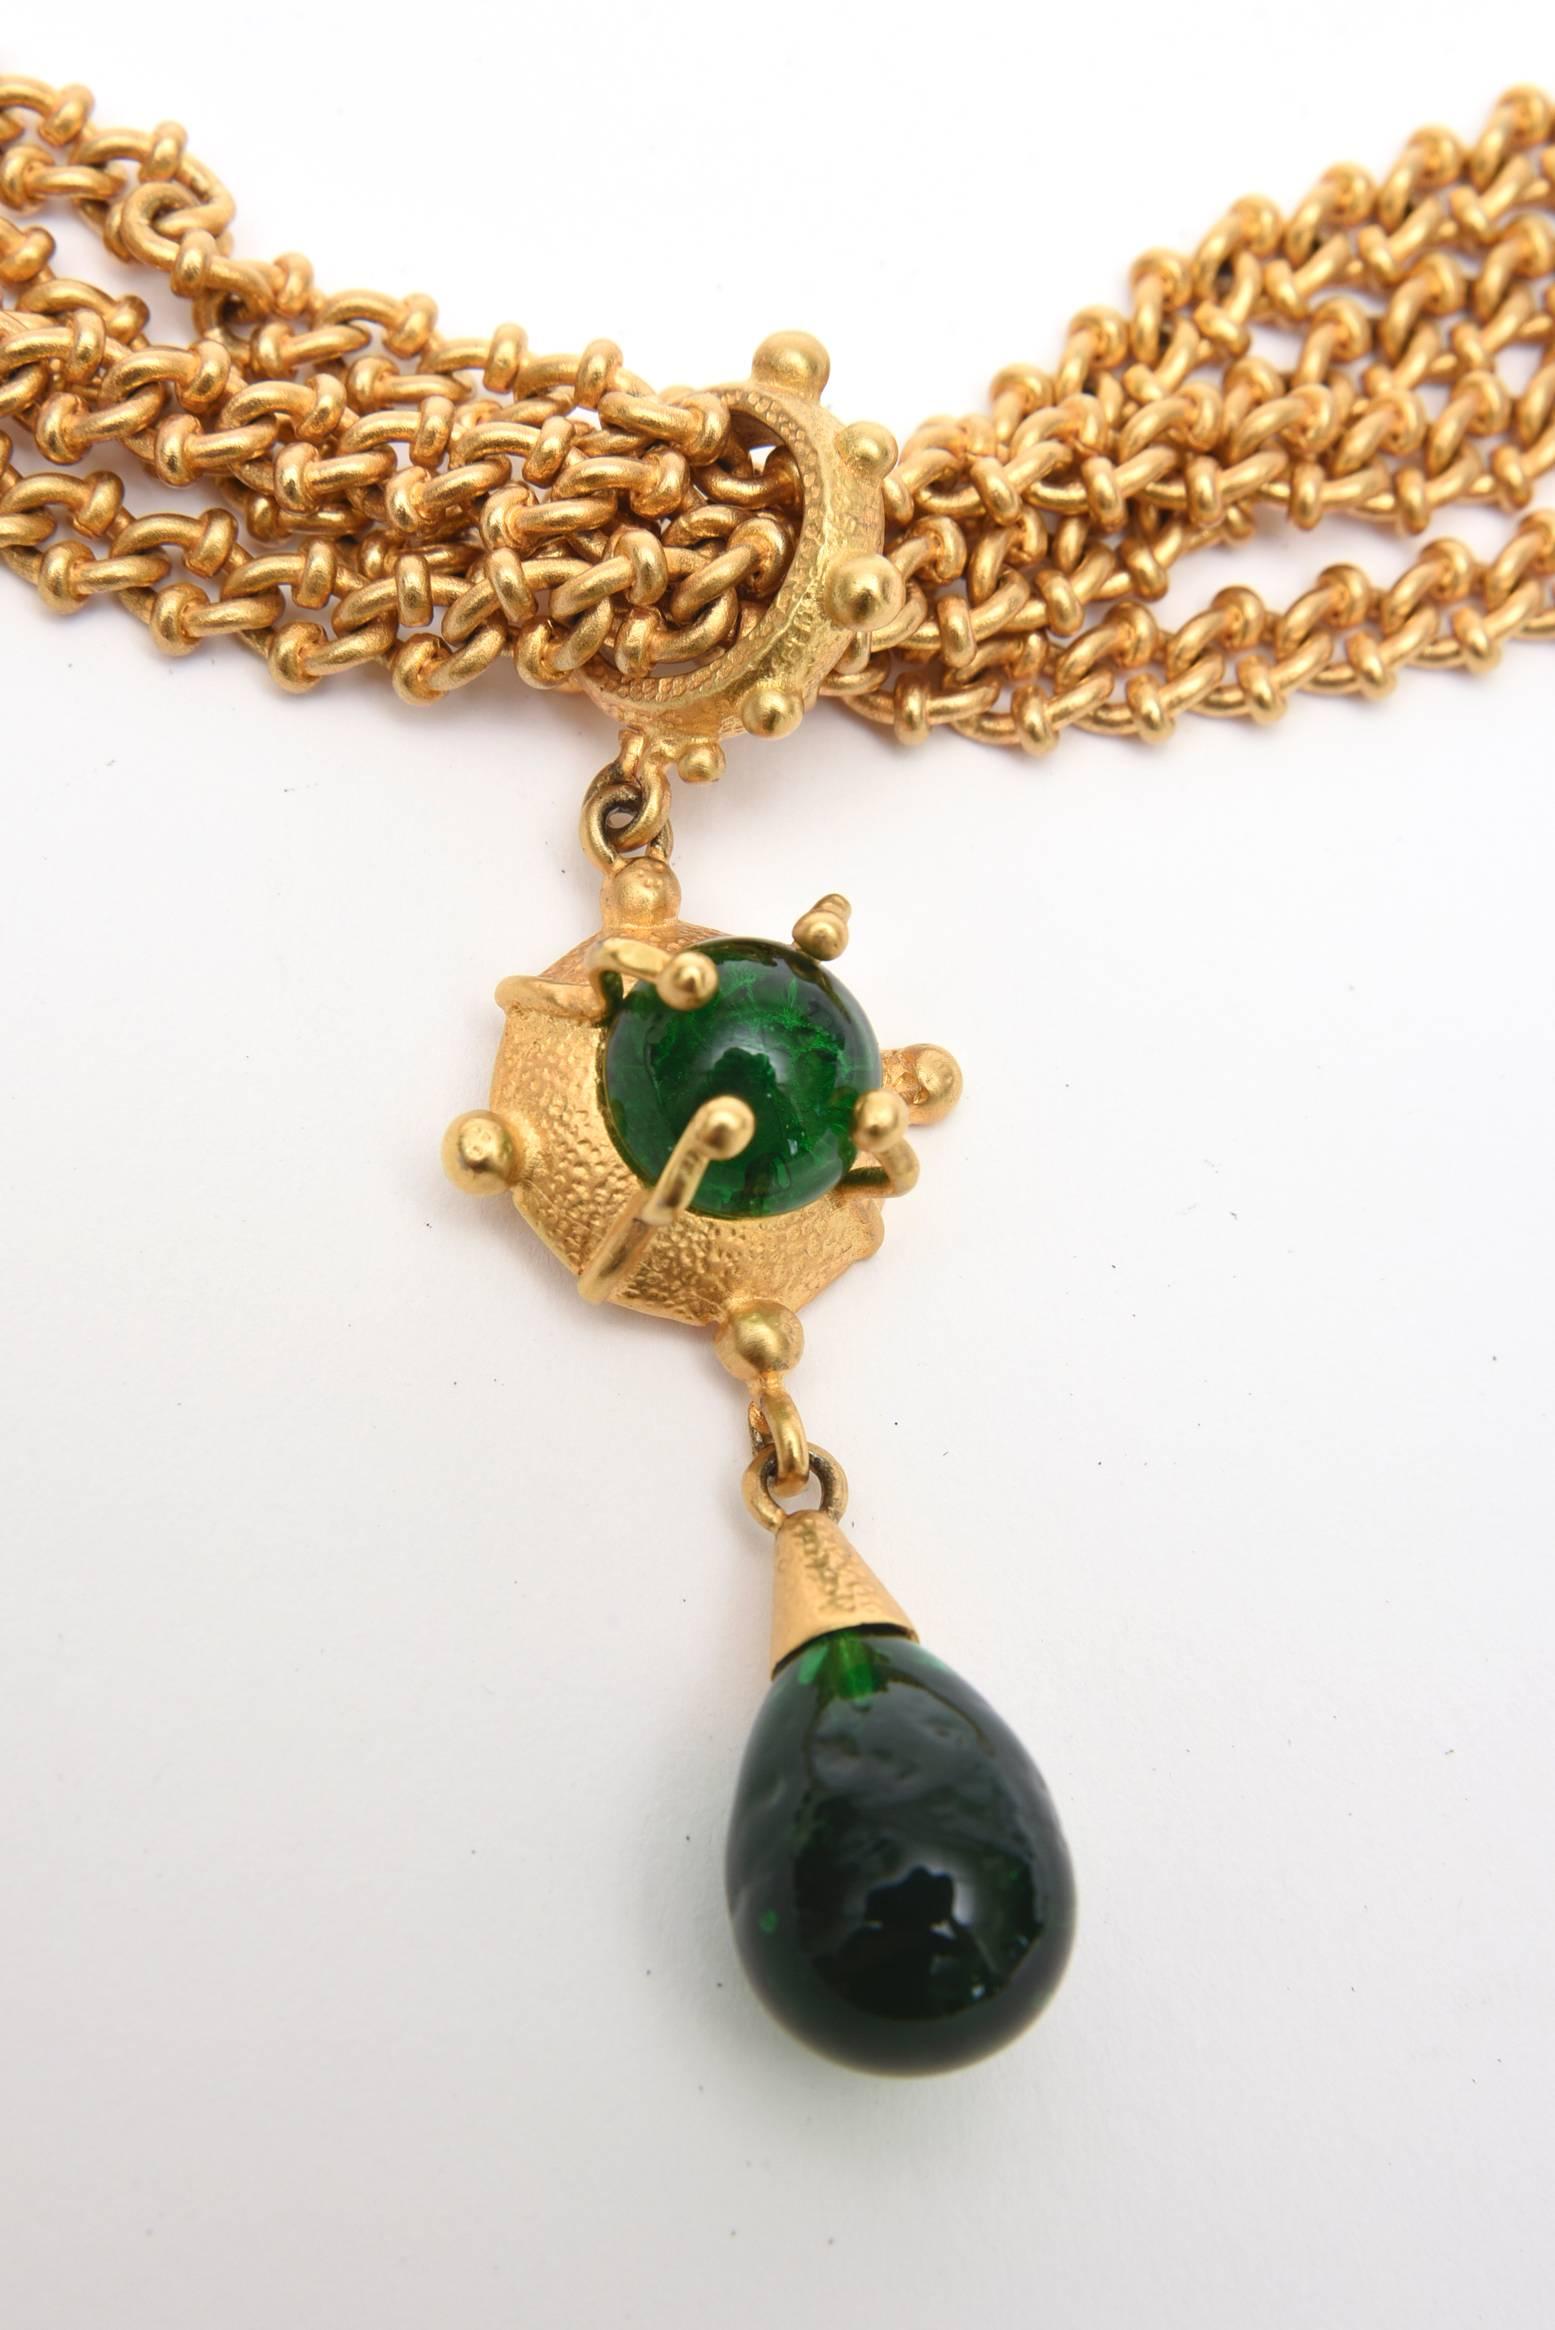  Andrew Spingarn Gold Plated With Green Glass Sculptural Necklace, Earrings Set For Sale 1